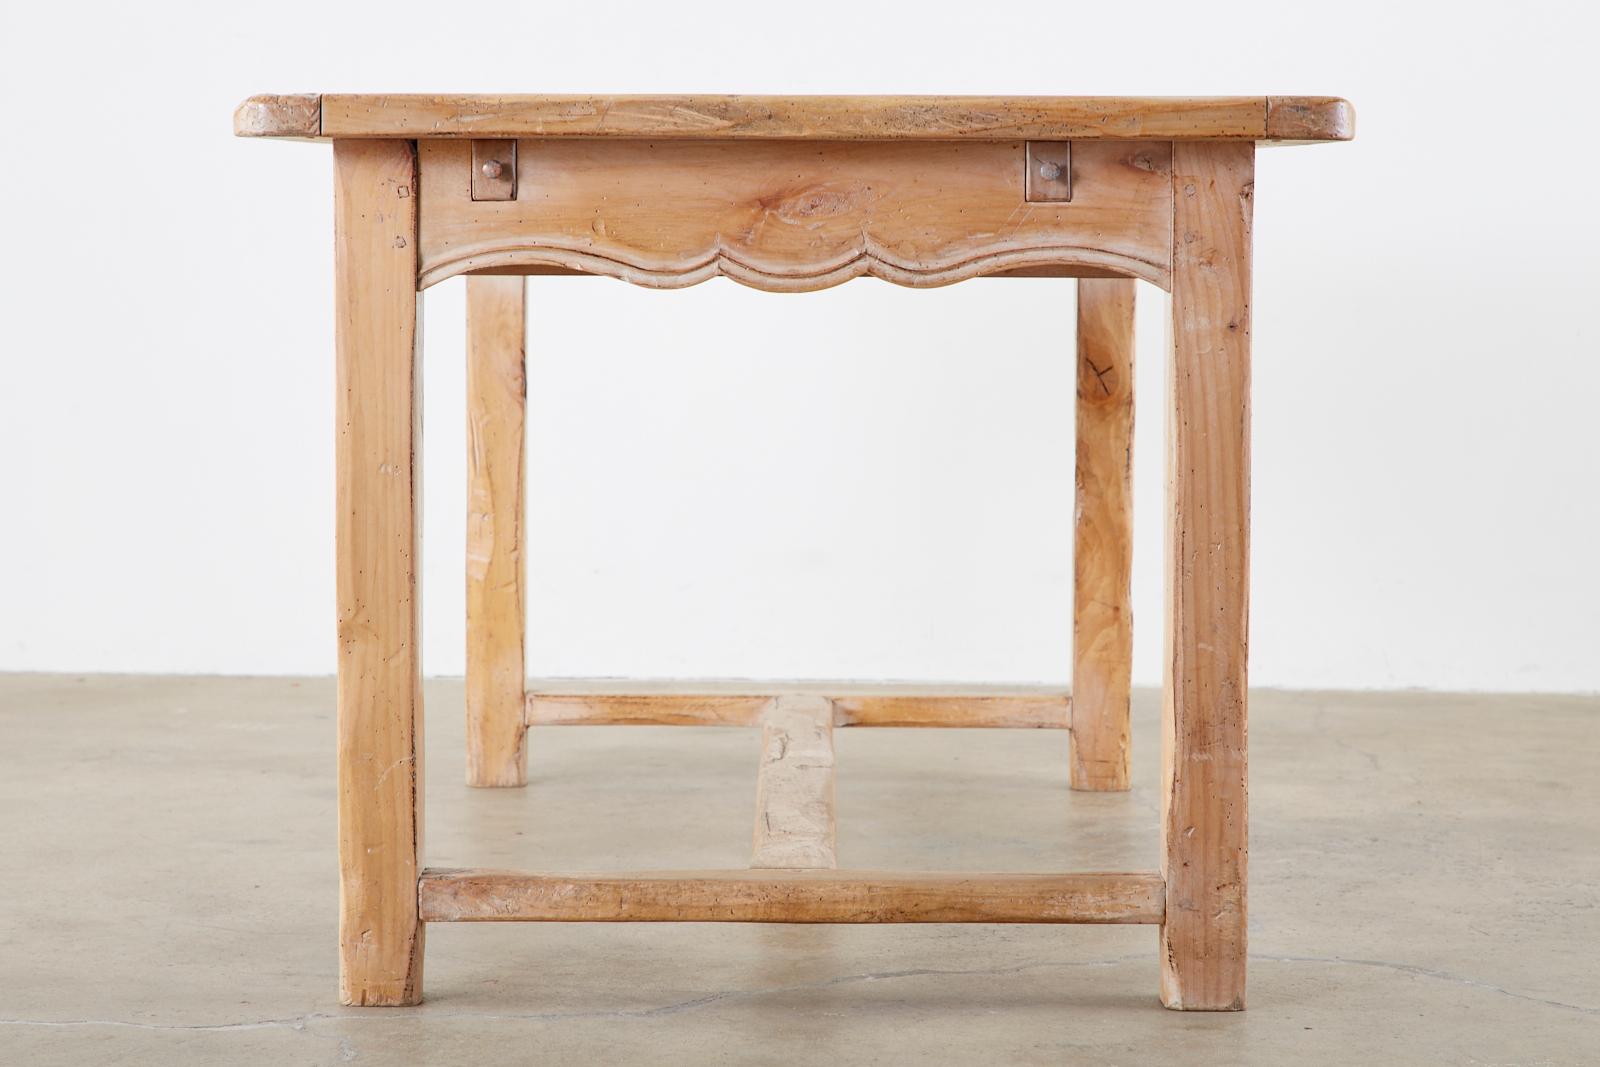 20th Century Rustic French Provincial Style Pine Farmhouse Dining Table